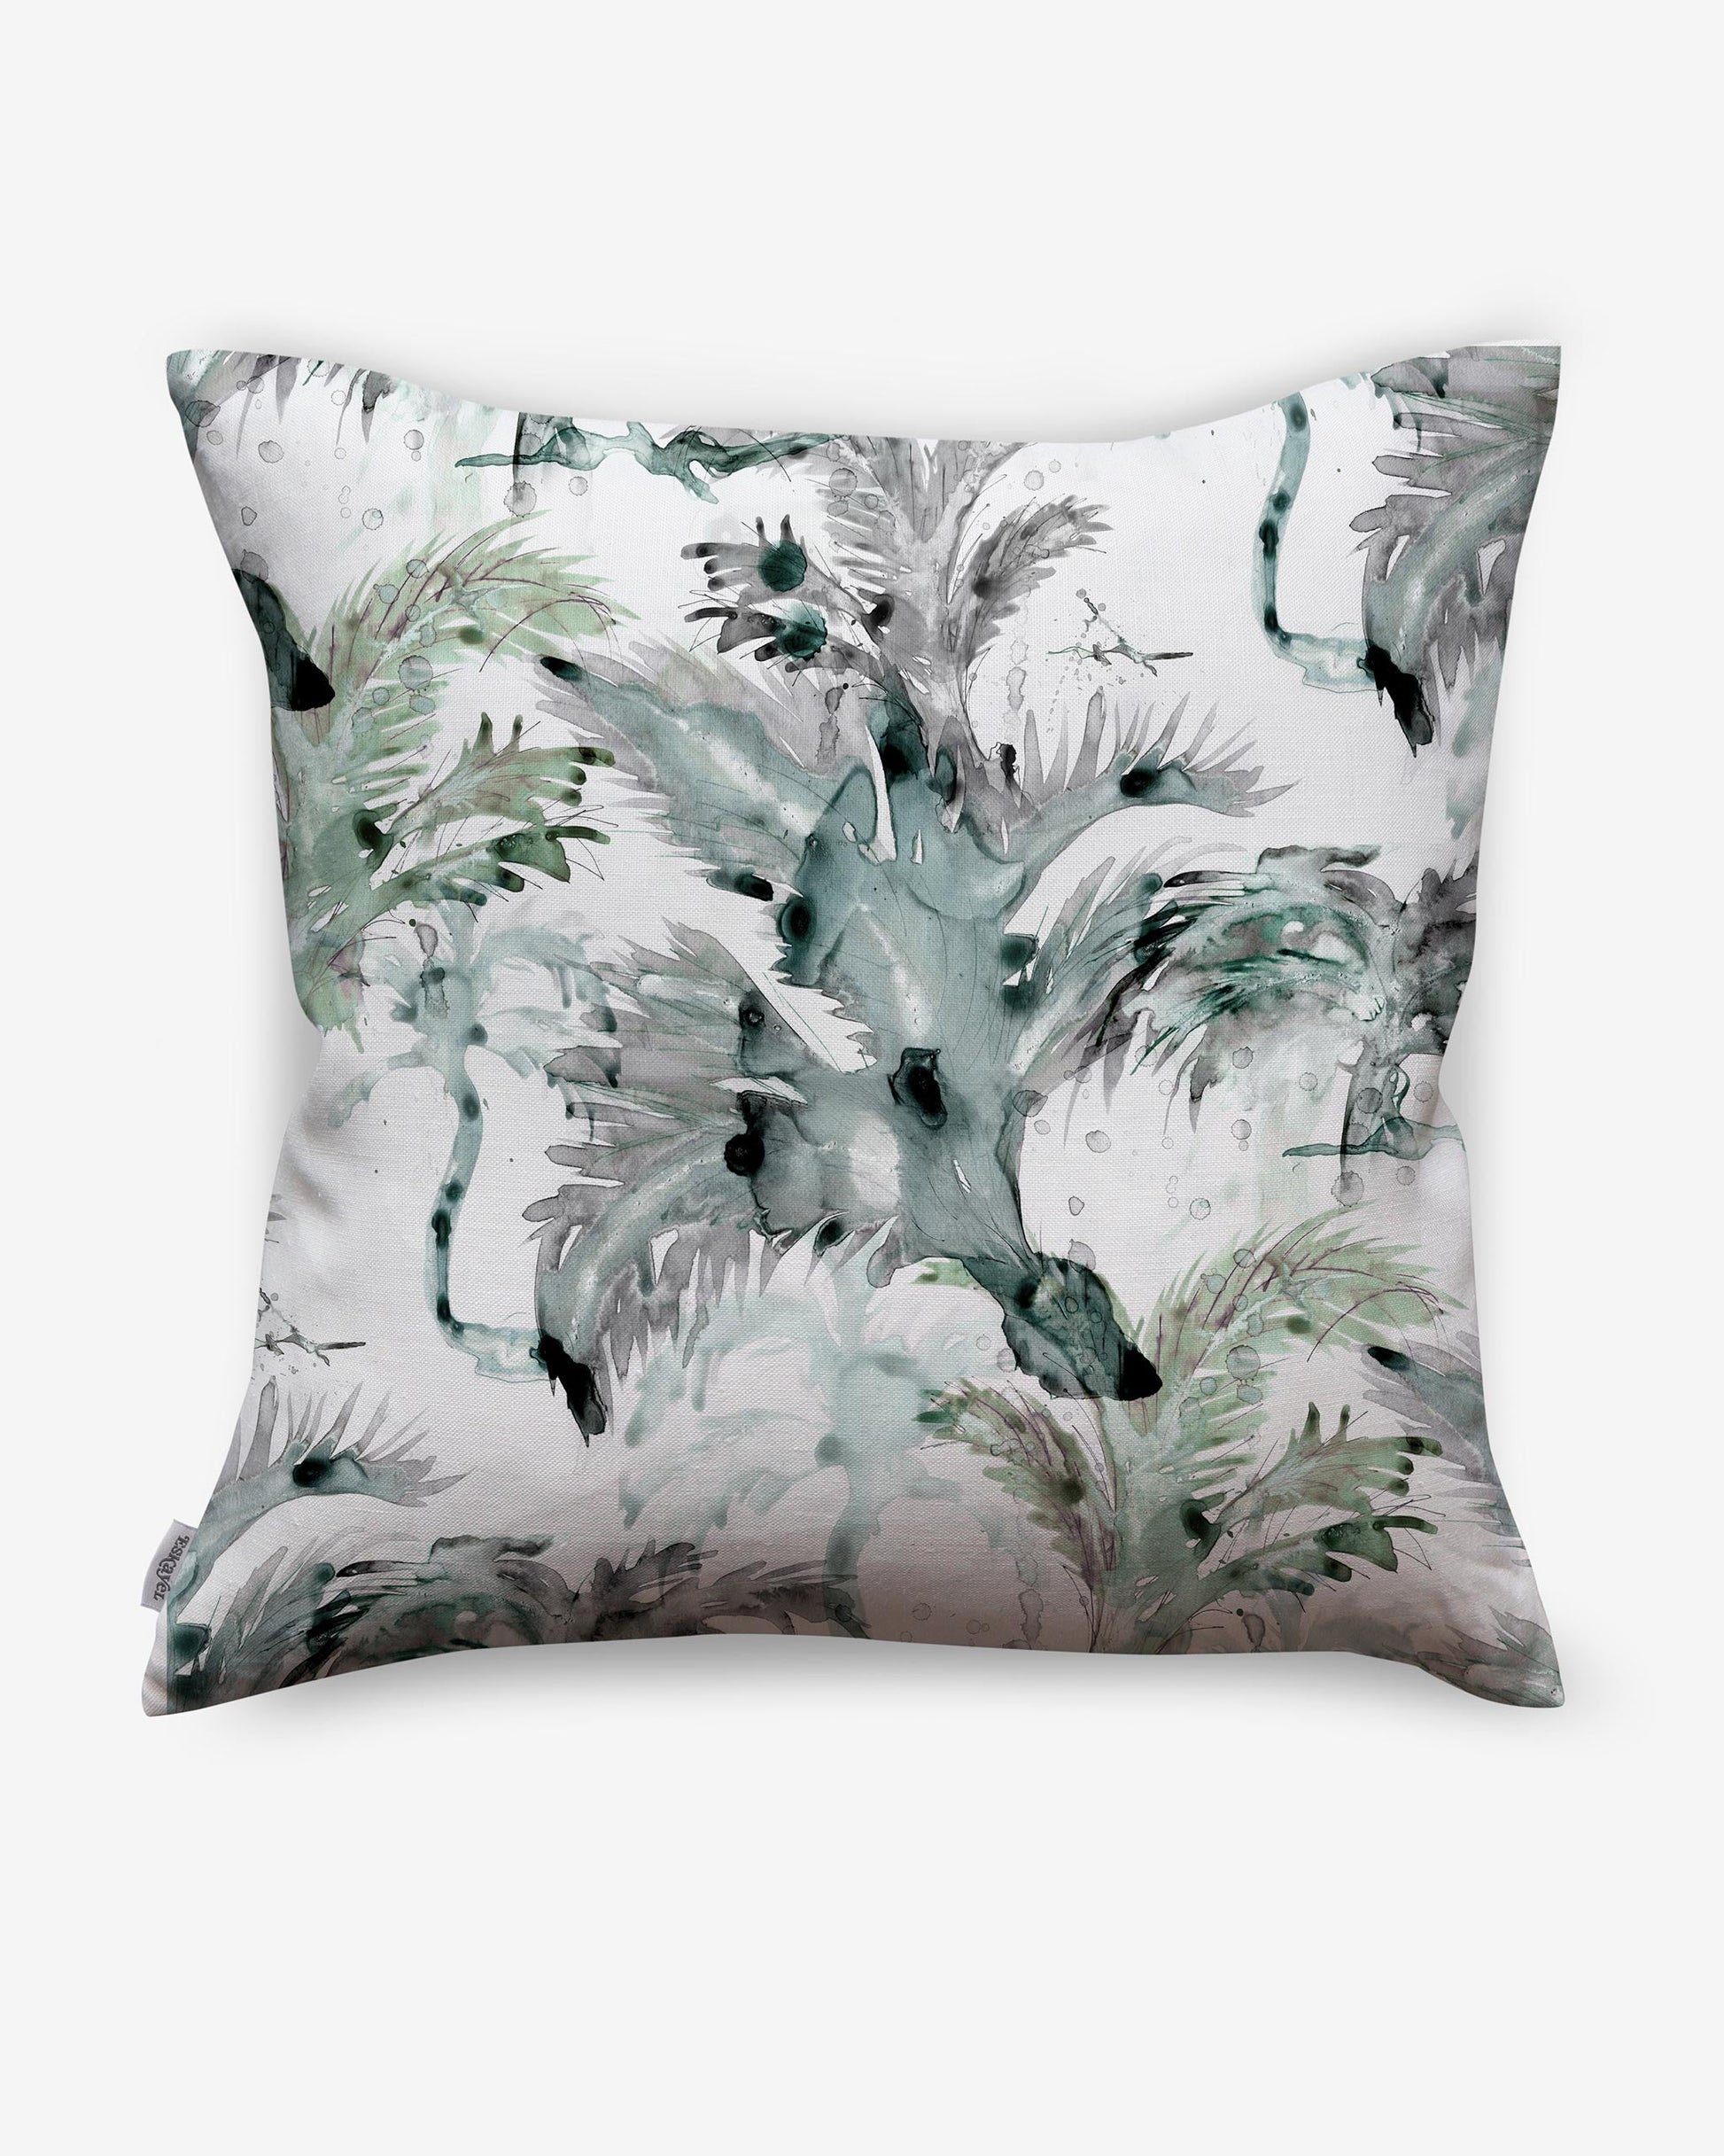 A Cocos Pillow with palm tree motifs on it